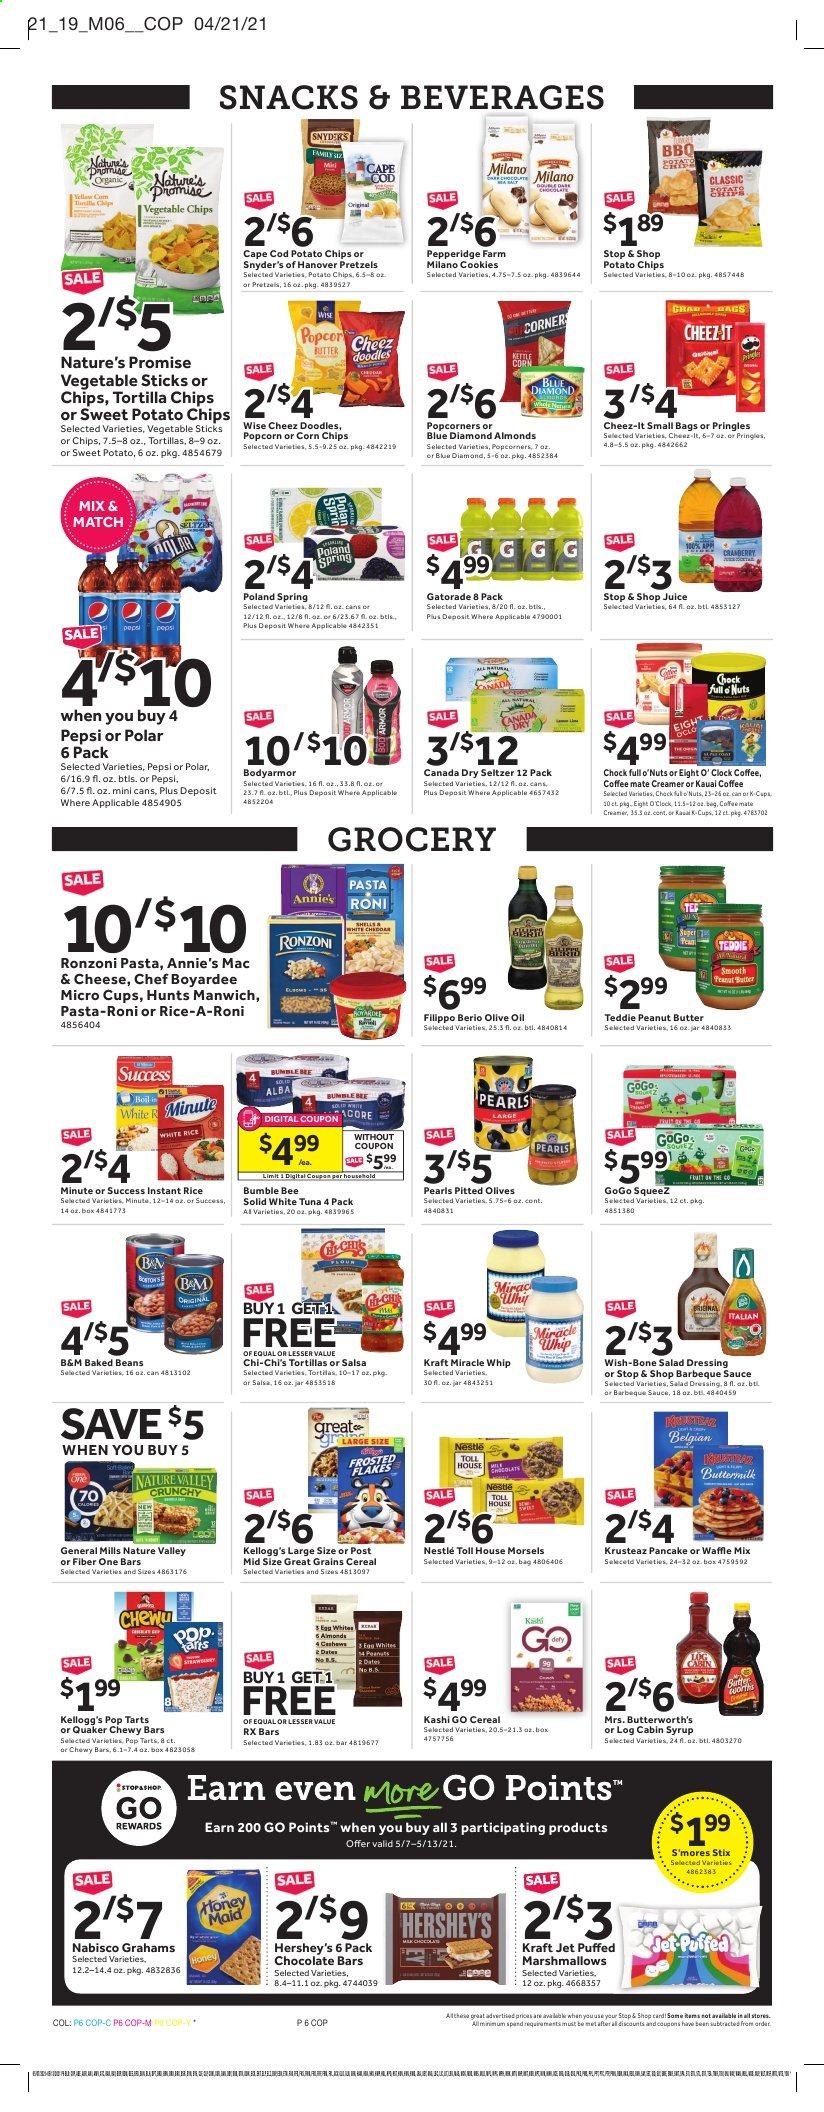 thumbnail - Stop & Shop Flyer - 05/07/2021 - 05/13/2021 - Sales products - pretzels, Nature’s Promise, cod, tuna, pasta, Bumble Bee, pancakes, Quaker, Annie's, Kraft®, buttermilk, Coffee-Mate, creamer, Miracle Whip, Hershey's, sweet potato fries, cookies, marshmallows, Nestlé, snack, Kellogg's, Pop-Tarts, chocolate bar, tortilla chips, kettle corn, potato chips, Pringles, chips, corn chips, popcorn, vegetable chips, Cheez-It, olives, baked beans, Manwich, Chef Boyardee, cereals, Nature Valley, Fiber One, rice, white rice, BBQ sauce, salad dressing, dressing, salsa, olive oil, oil, honey, peanut butter, syrup, almonds, peanuts, Blue Diamond, Canada Dry, Pepsi, juice, Gatorade, seltzer water, coffee capsules, K-Cups, Jet. Page 6.